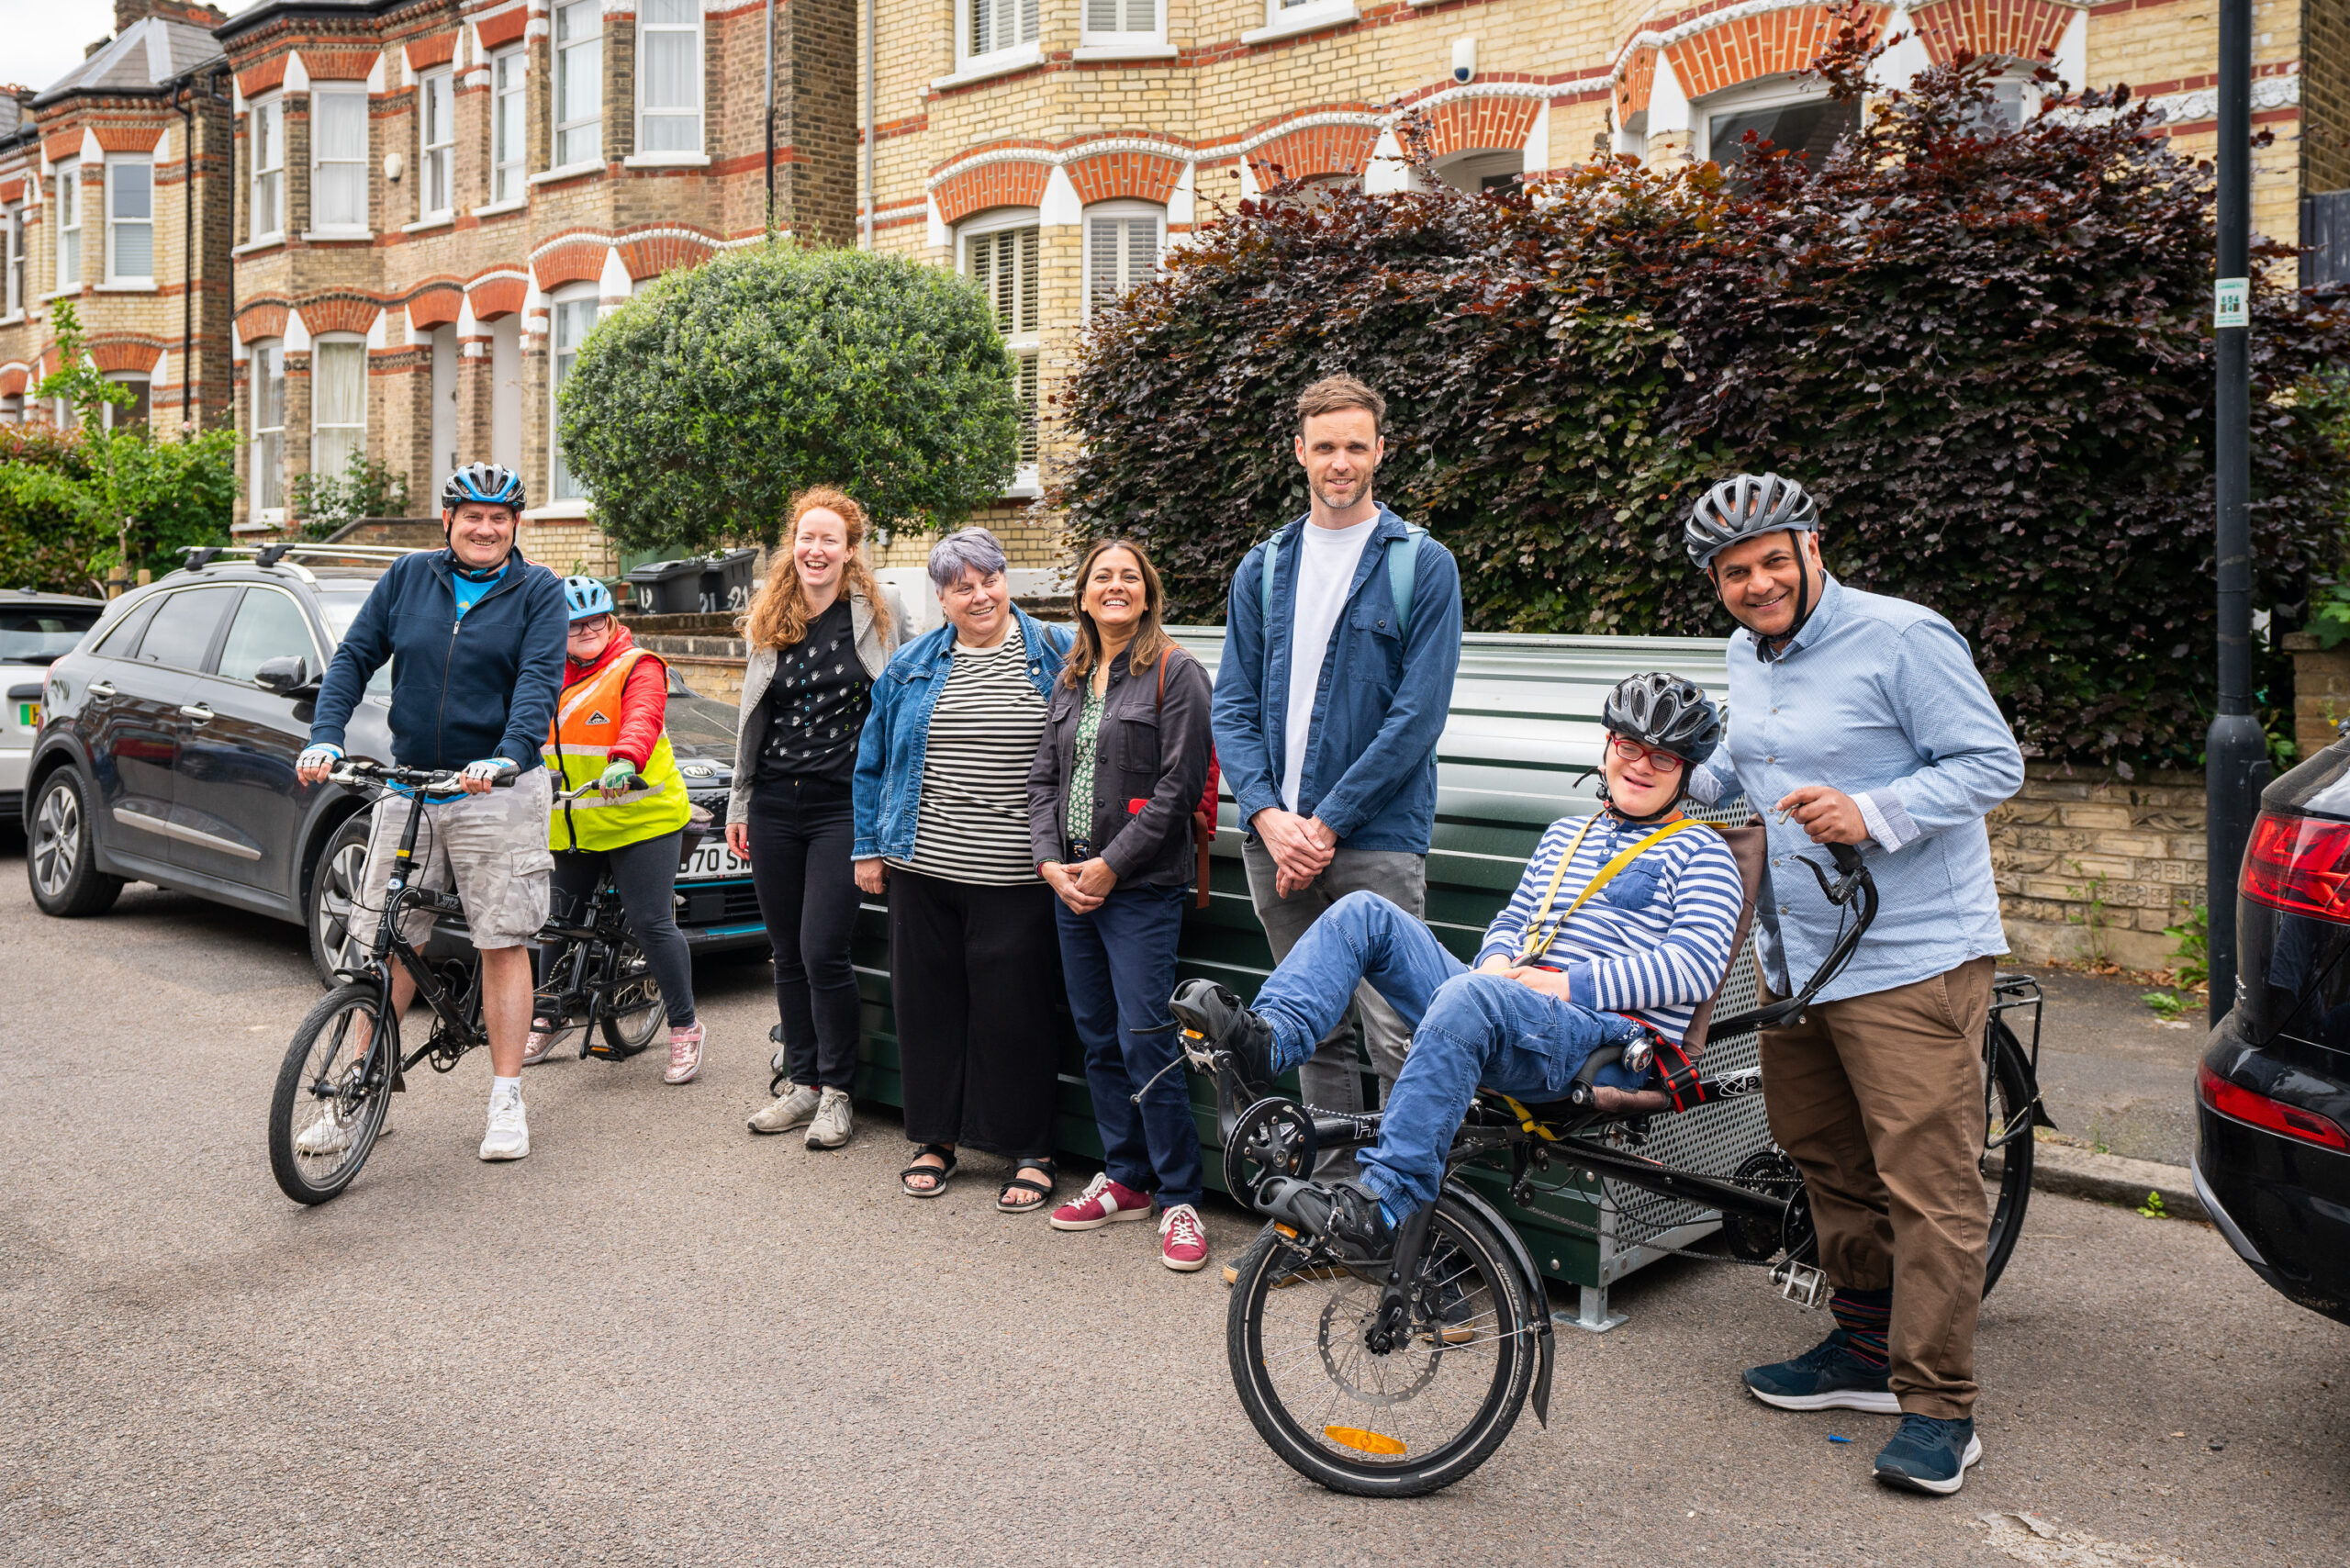 The Charles family, Cyclehoop team and Lambeth team with the adapted bikehangar